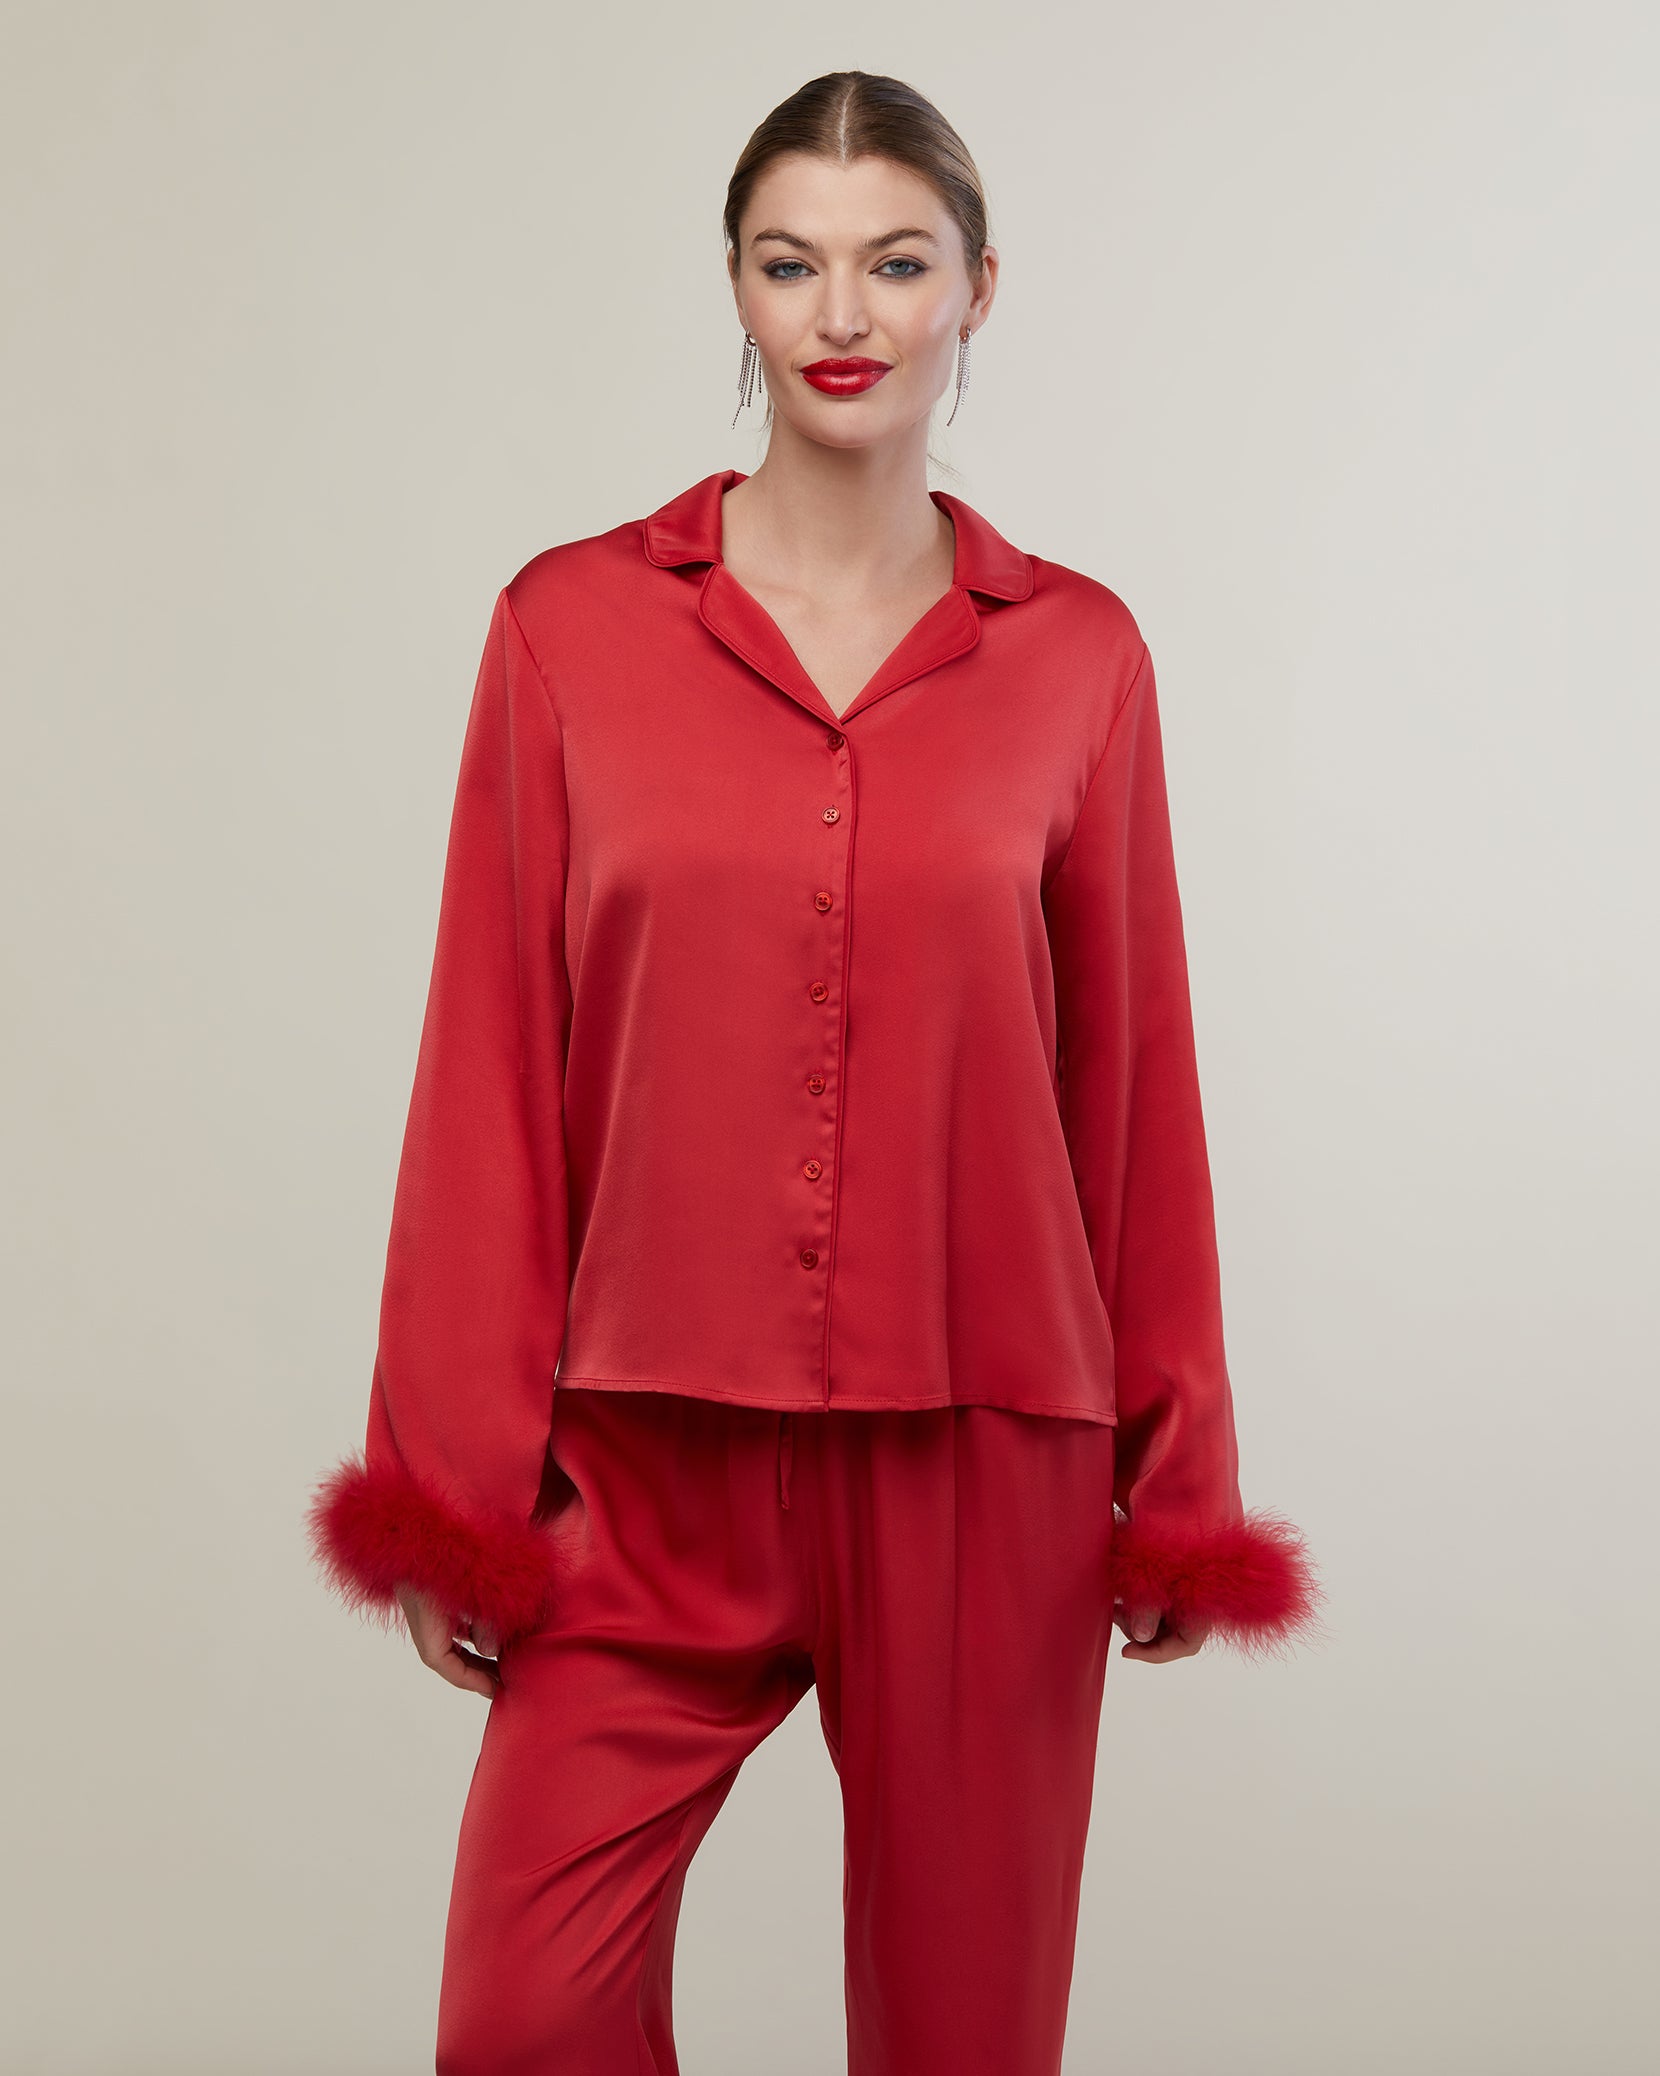 Pajamas to Elevate Your Nighttime Routine – Rachel Parcell, Inc.